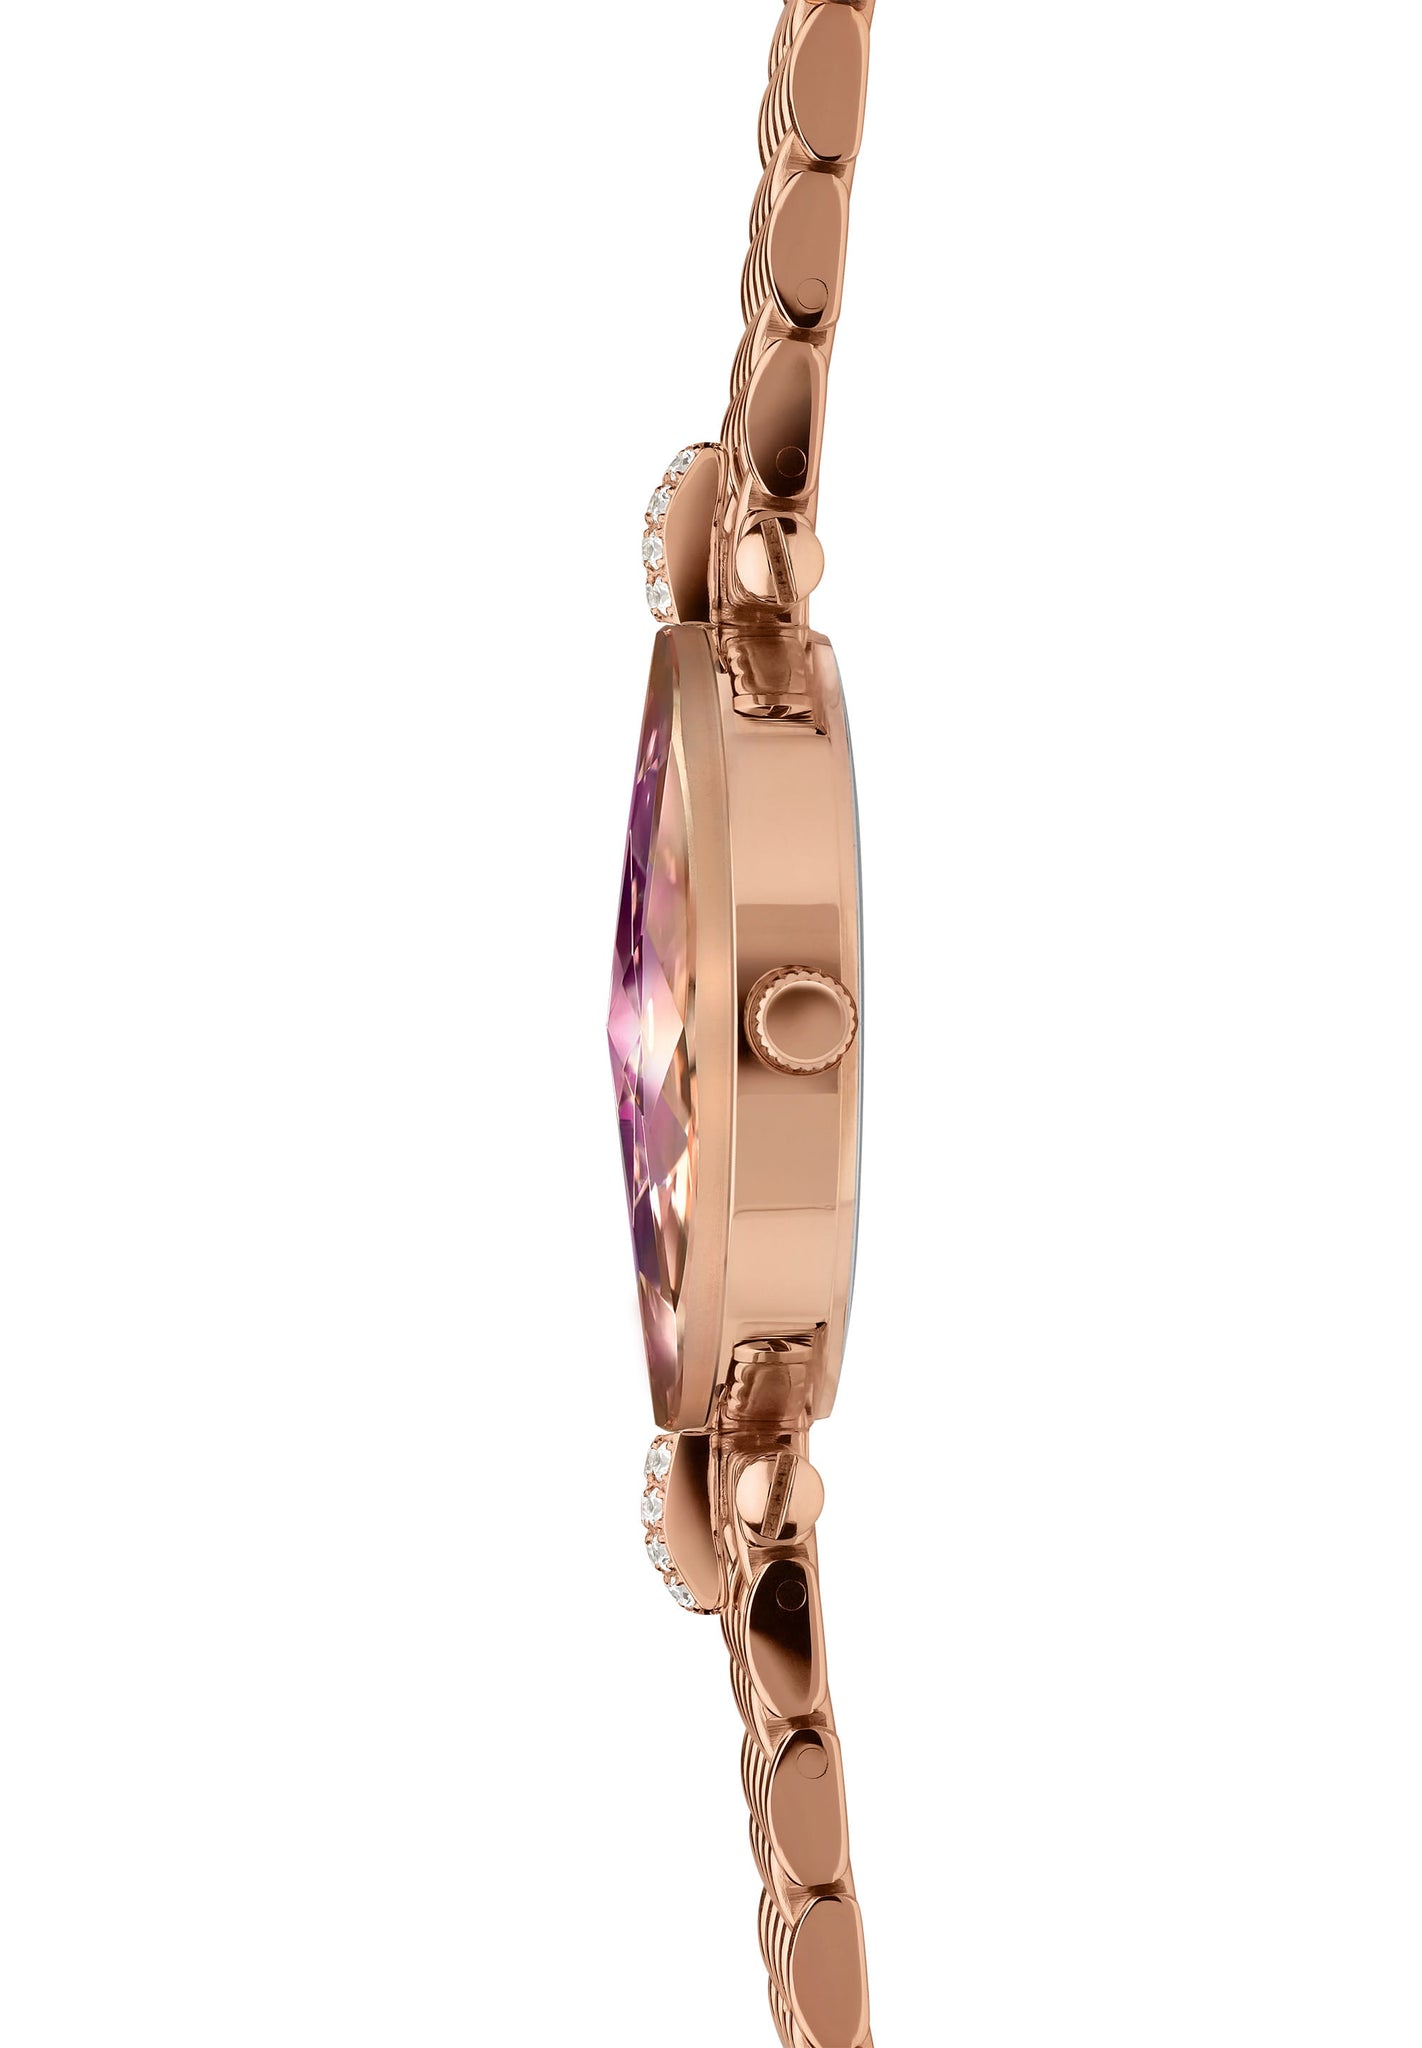 Facet Strass Reloj Mujer Suizo J5.714.M